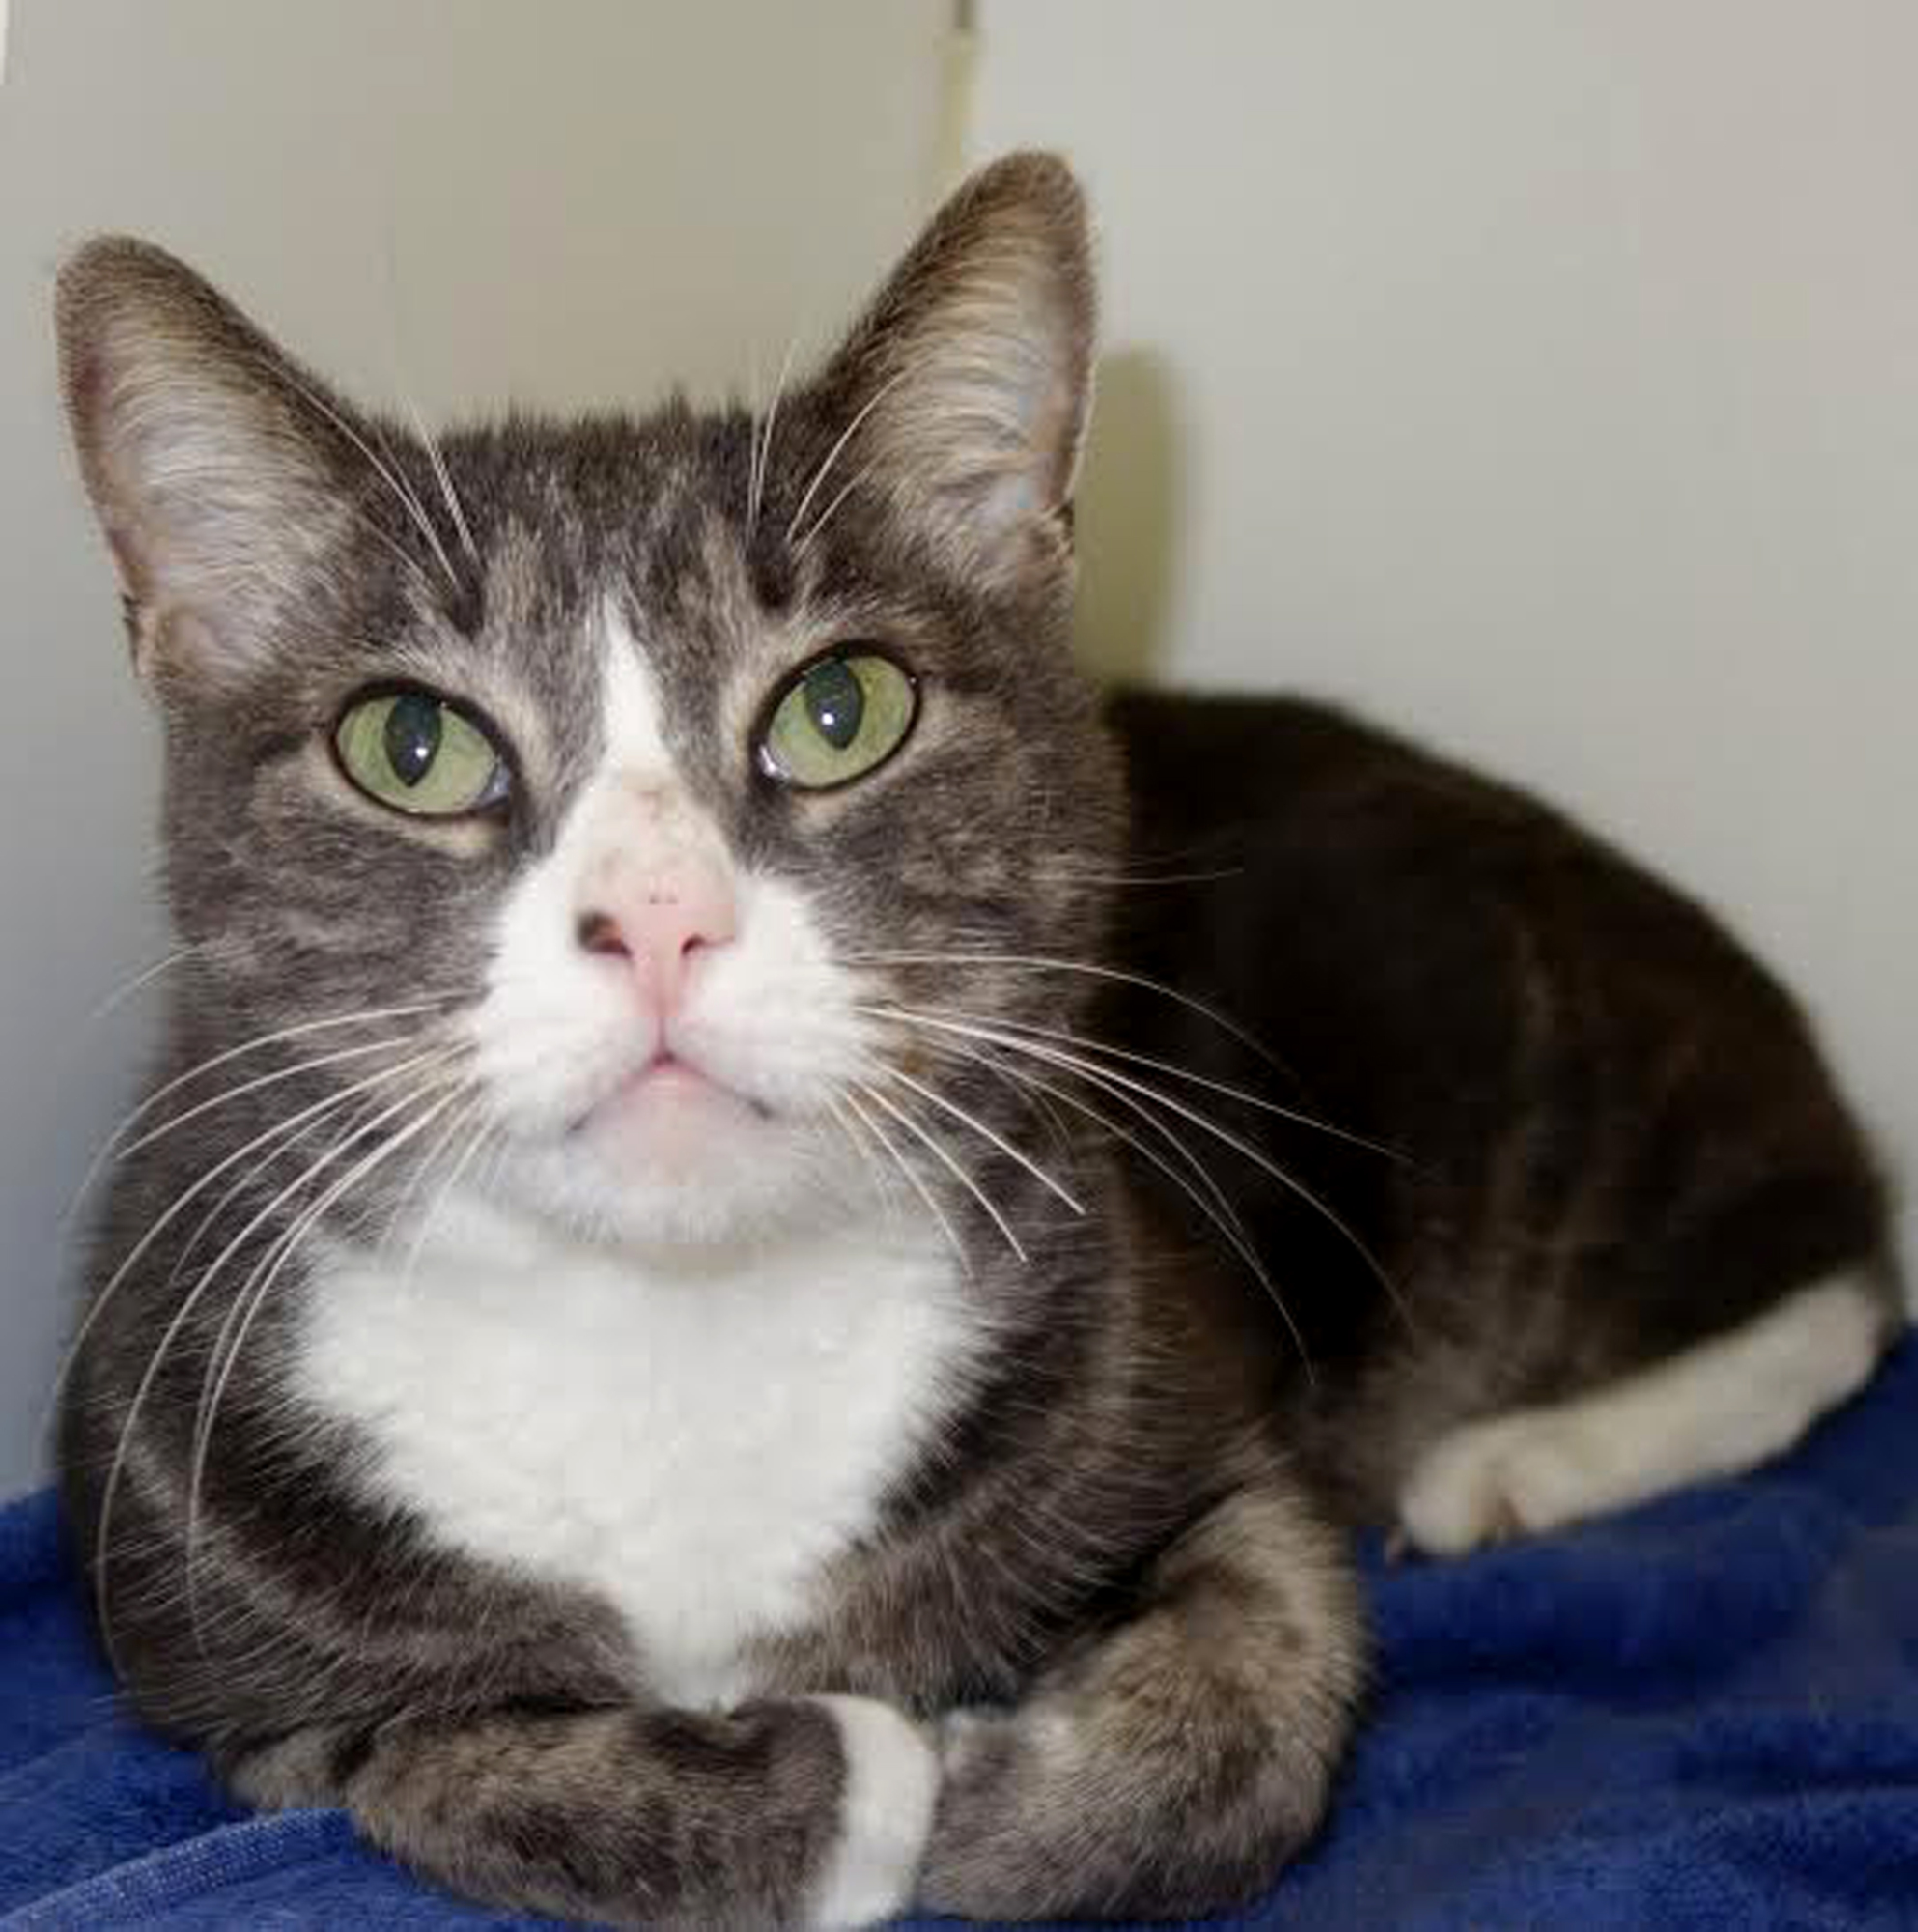 Fox, 31675170, is a 4-year-old, male cat, available at Flagler Humane Society. Courtesy photo